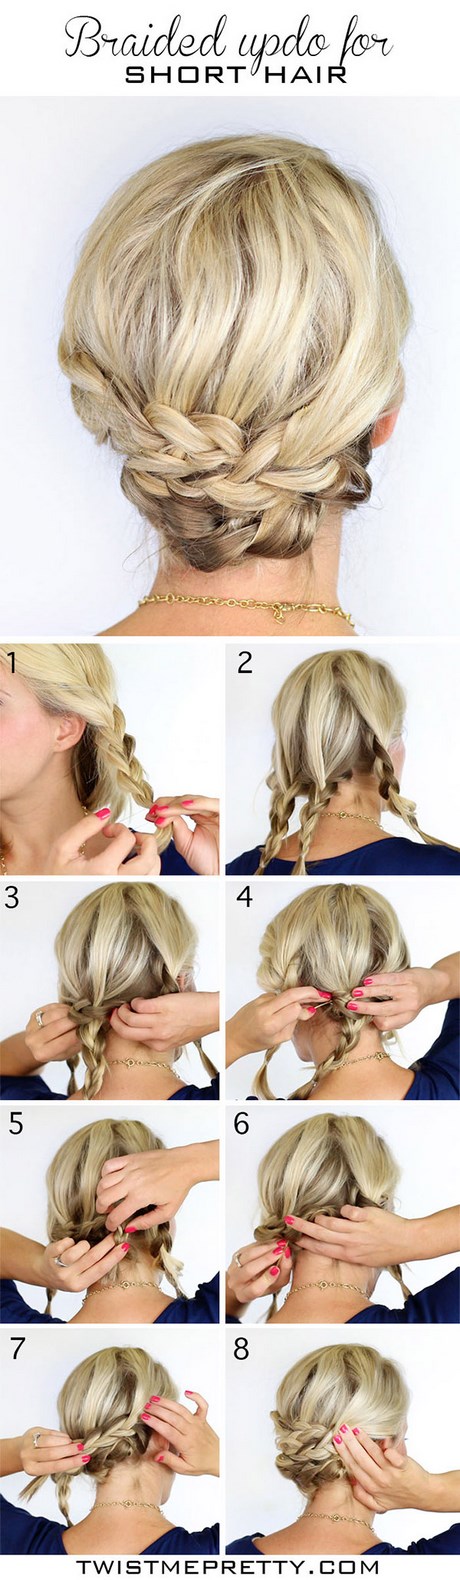 Easy hairstyles for short hair for wedding easy-hairstyles-for-short-hair-for-wedding-29_20